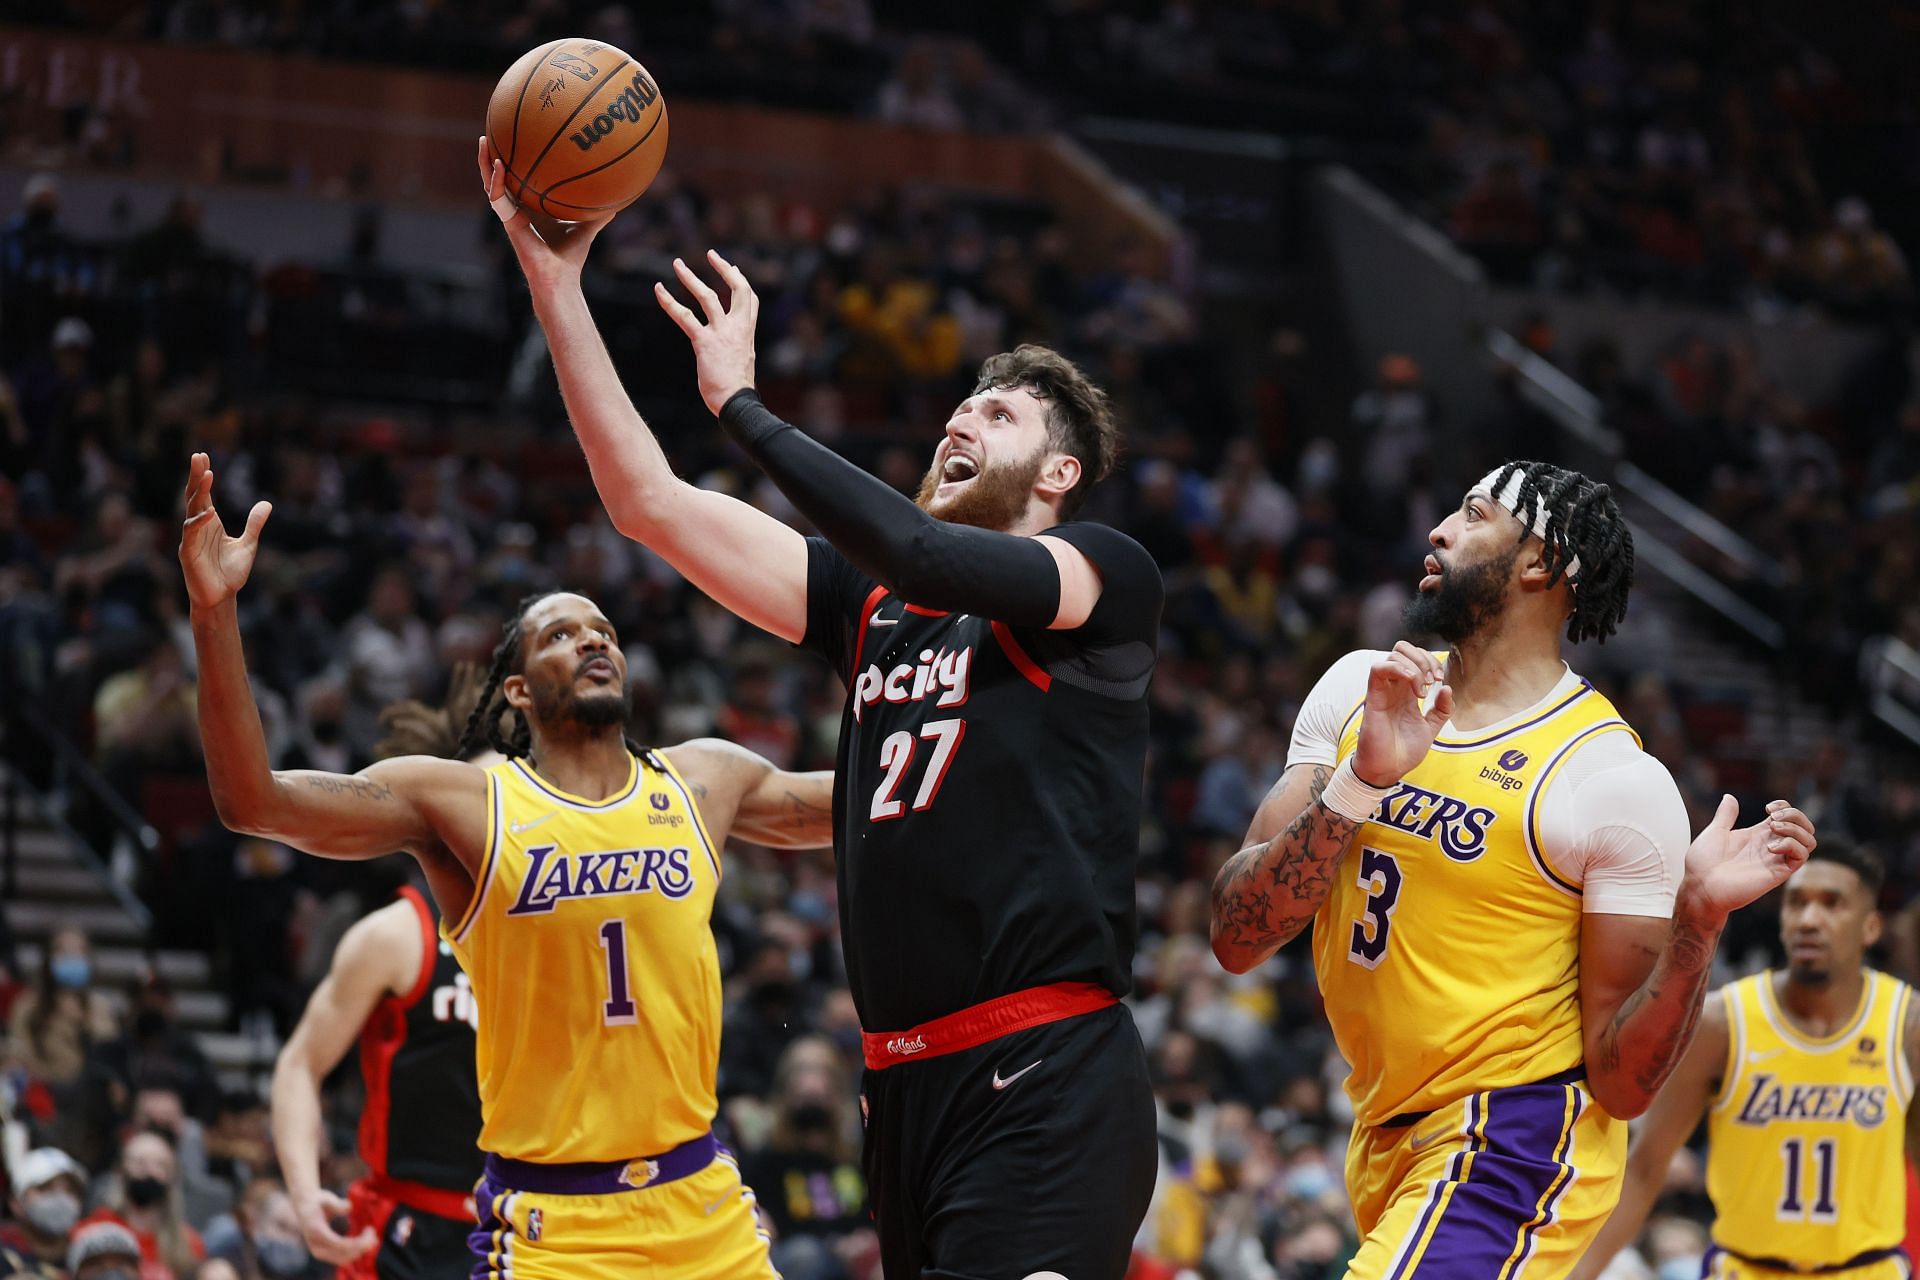 The Los Angeles Lakers against the Portland Trail Blazers